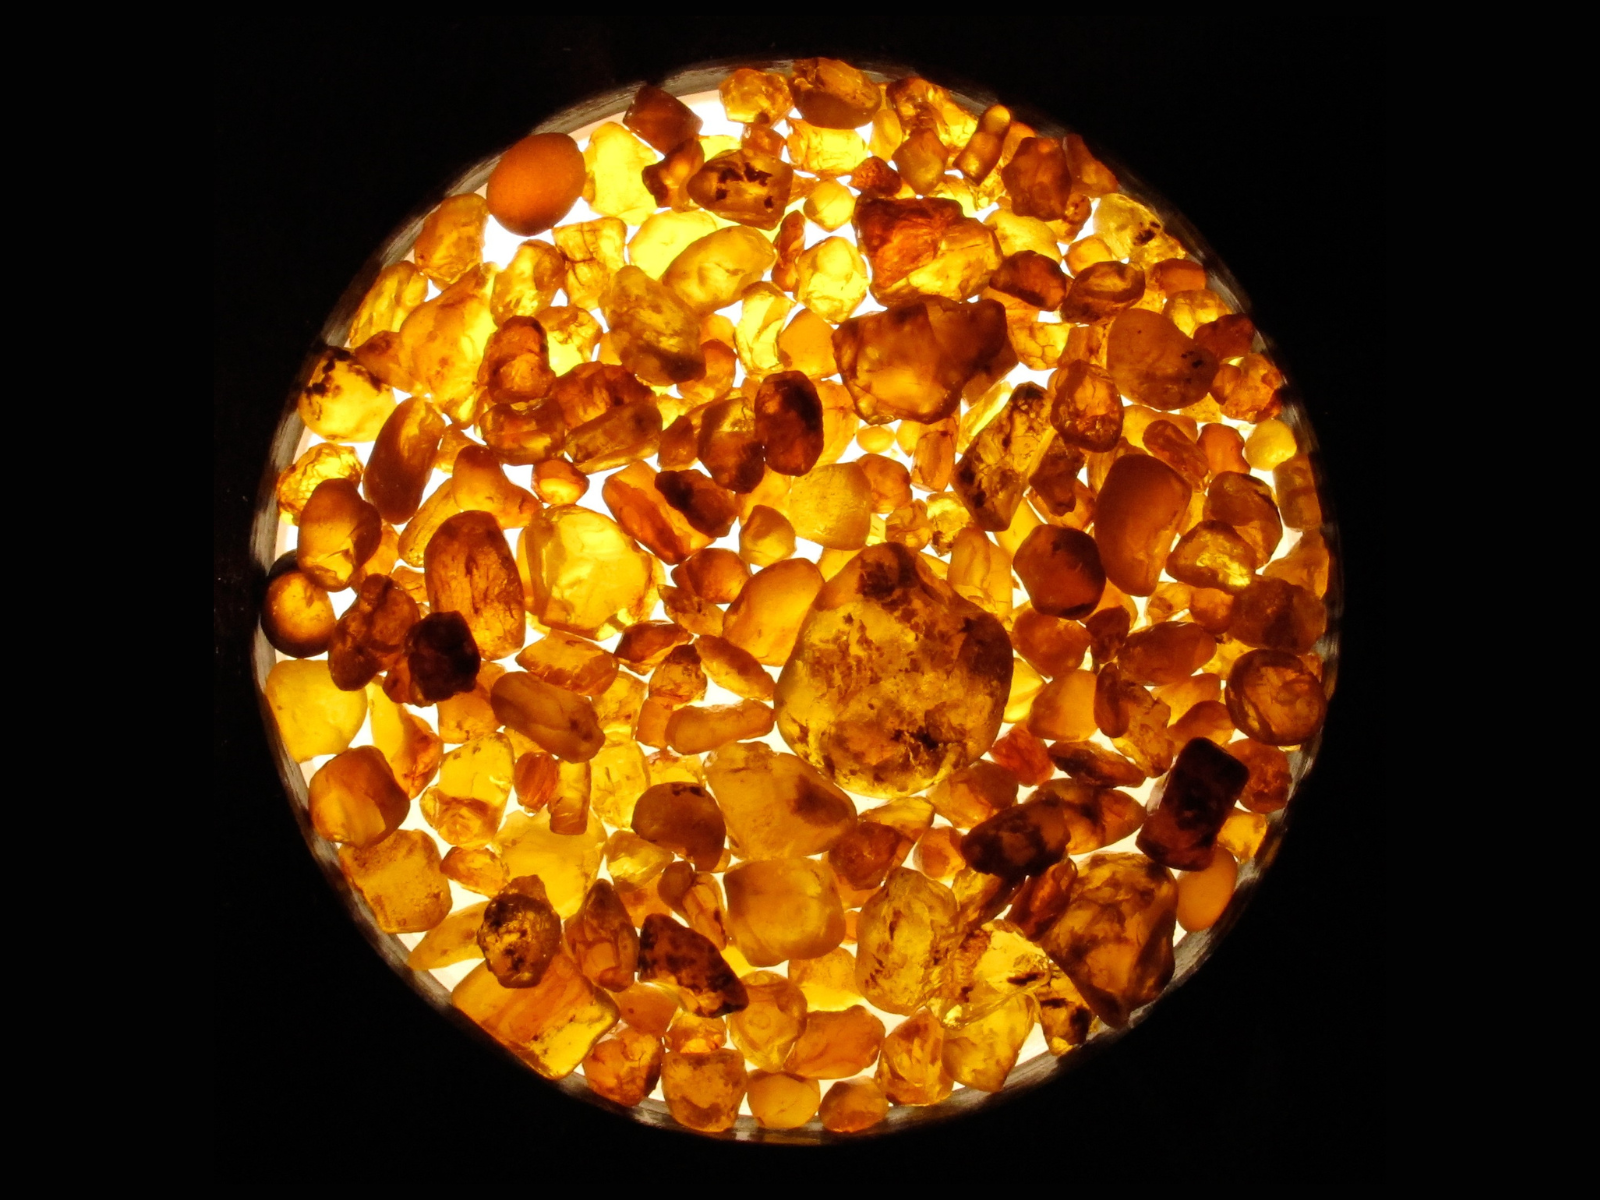 View through a microscope looking at a circle of pieces of gold-orange amber, lit from below.